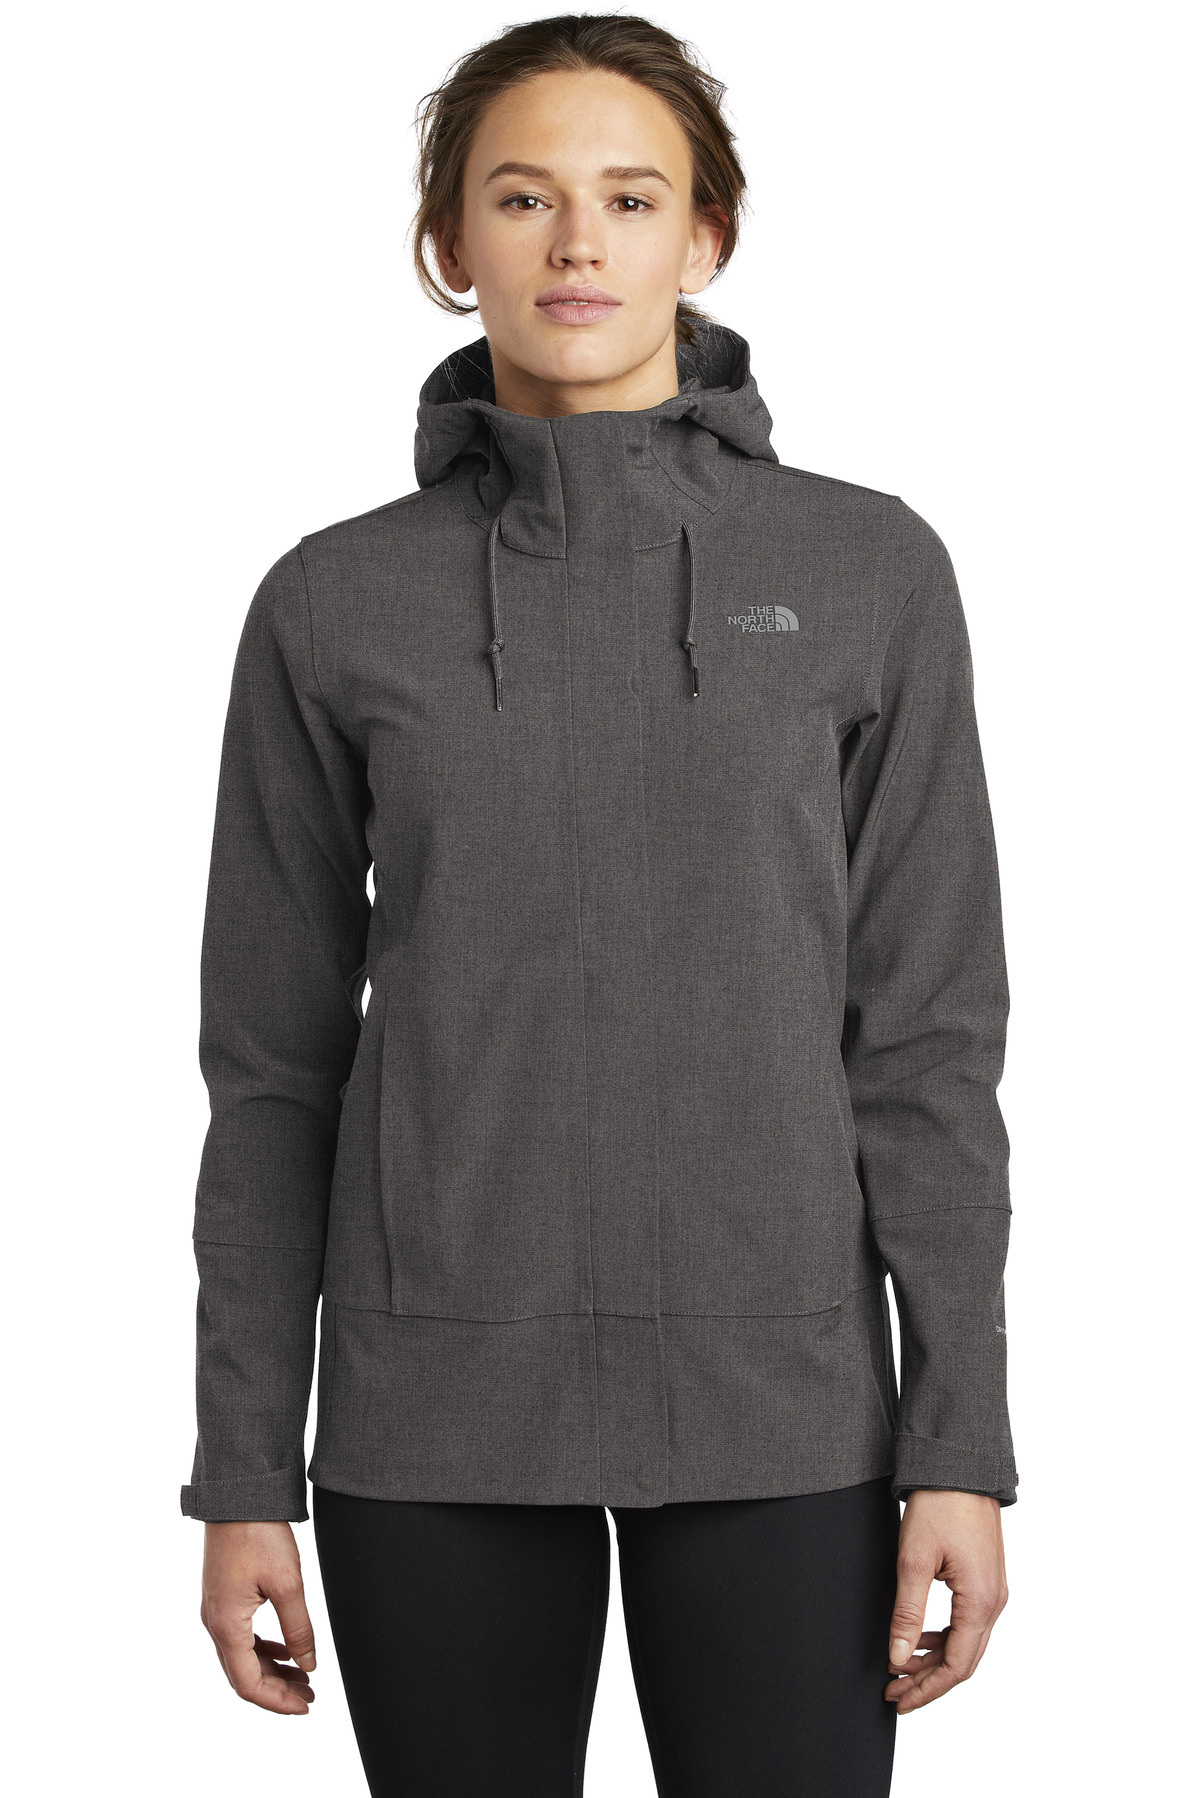 The North Face Ladies Outerwear for Corporate & Hospitality ® Ladies Apex DryVent Jacket-The North Face